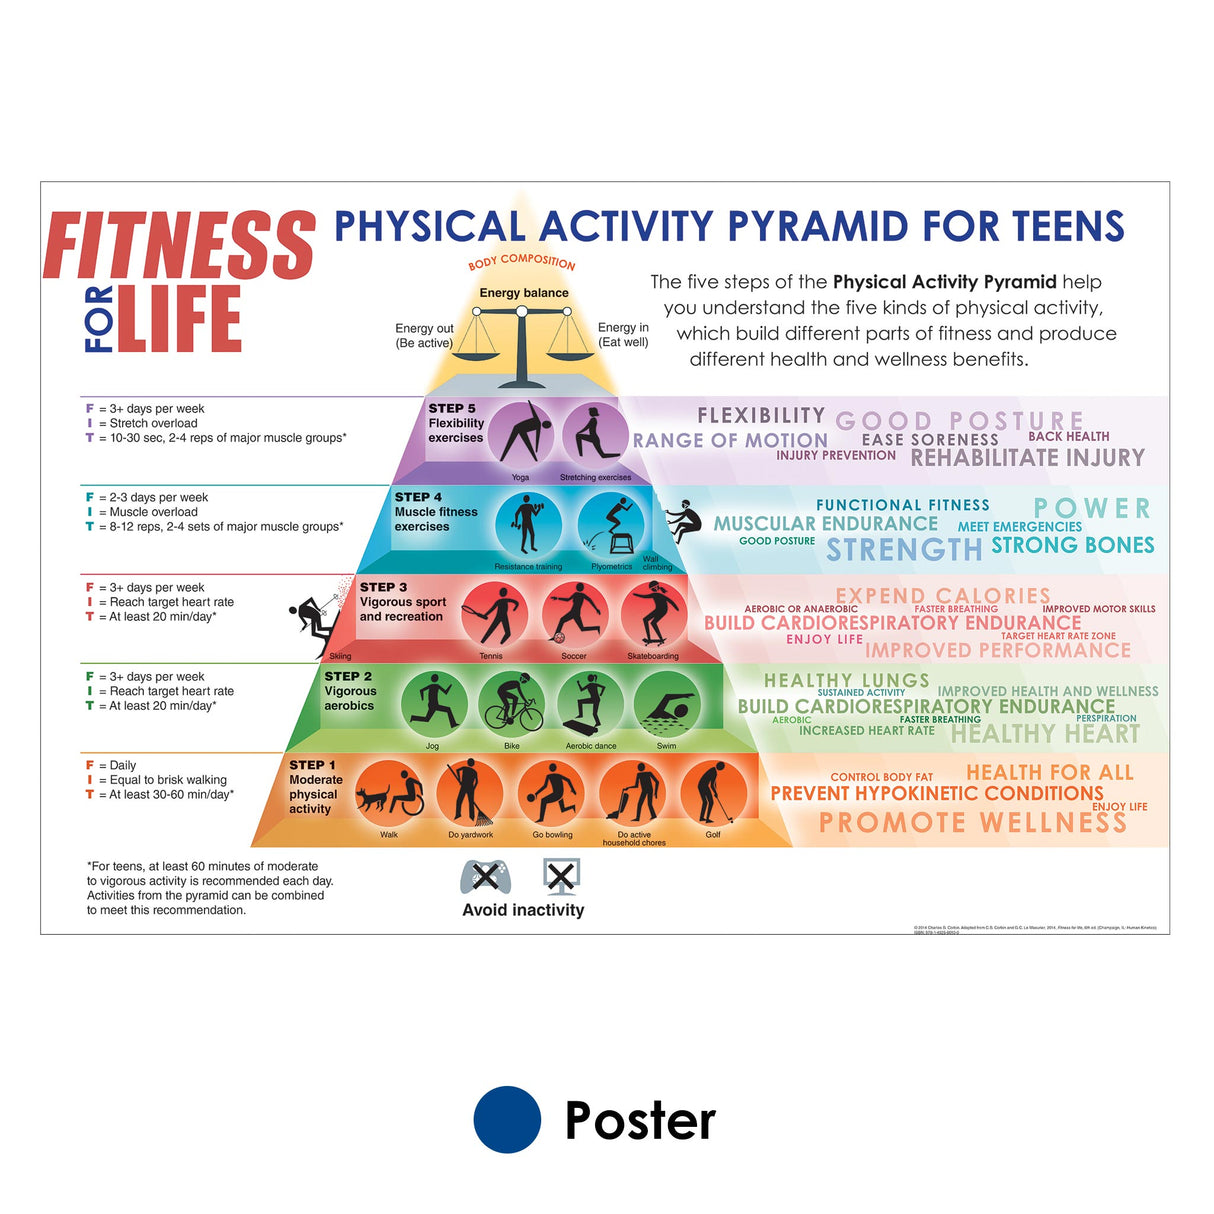 Fitness for Life Physical Activity Pyramid for Teens Poster